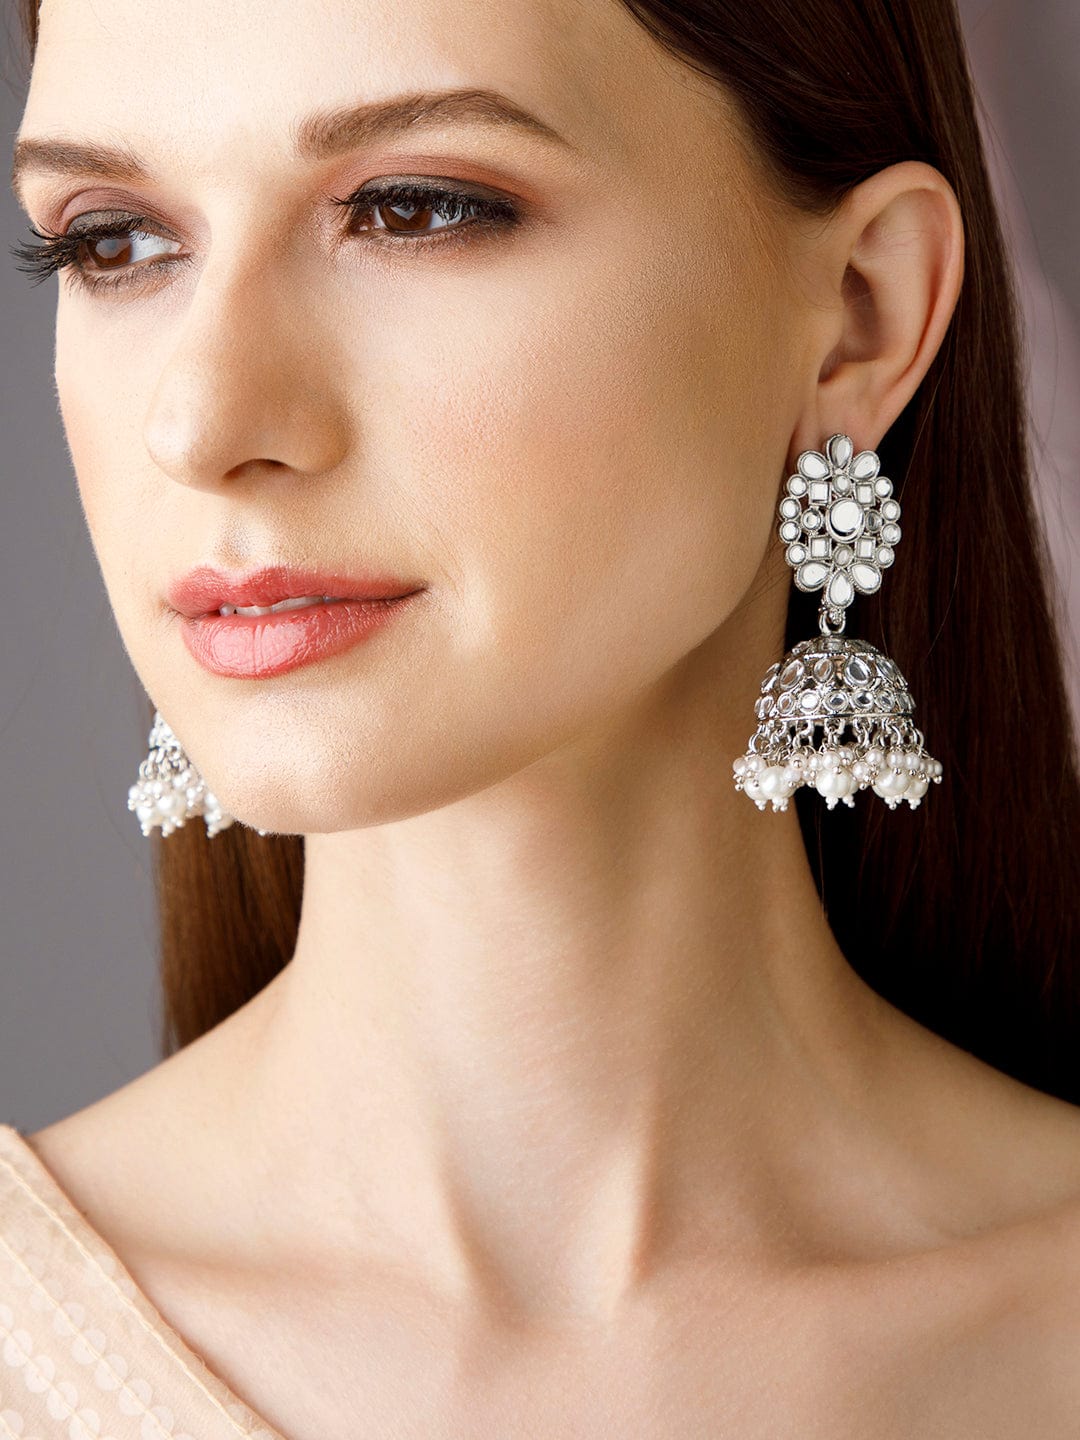 Rubans Silver Plated Silver Jhumki Earrings Studded With Mirror Design Earrings